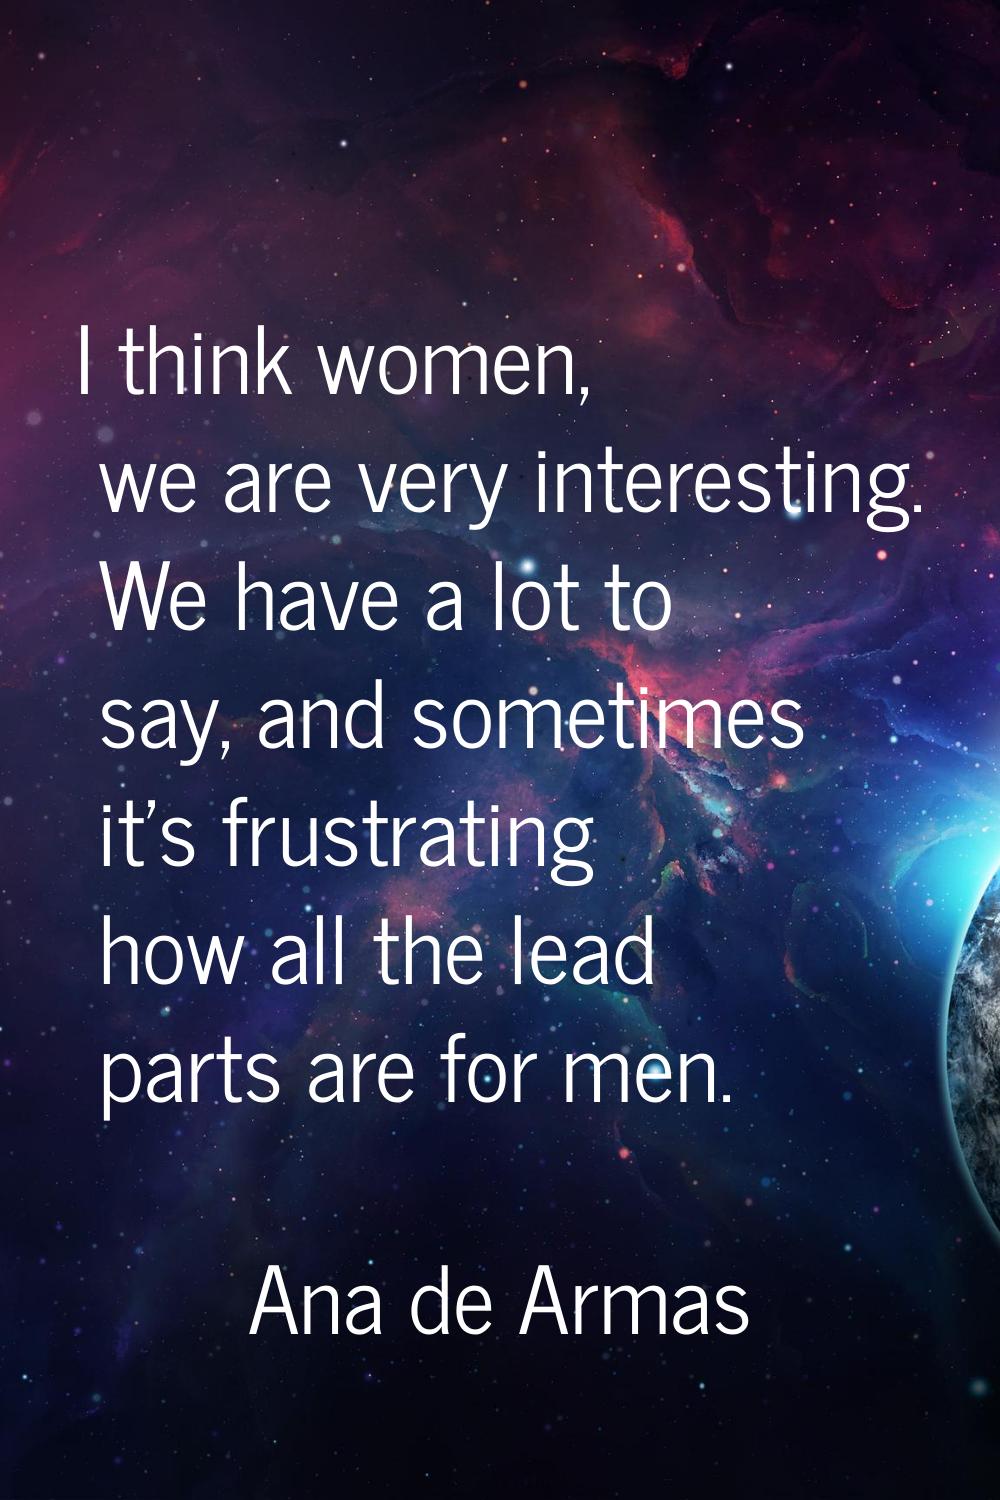 I think women, we are very interesting. We have a lot to say, and sometimes it's frustrating how al